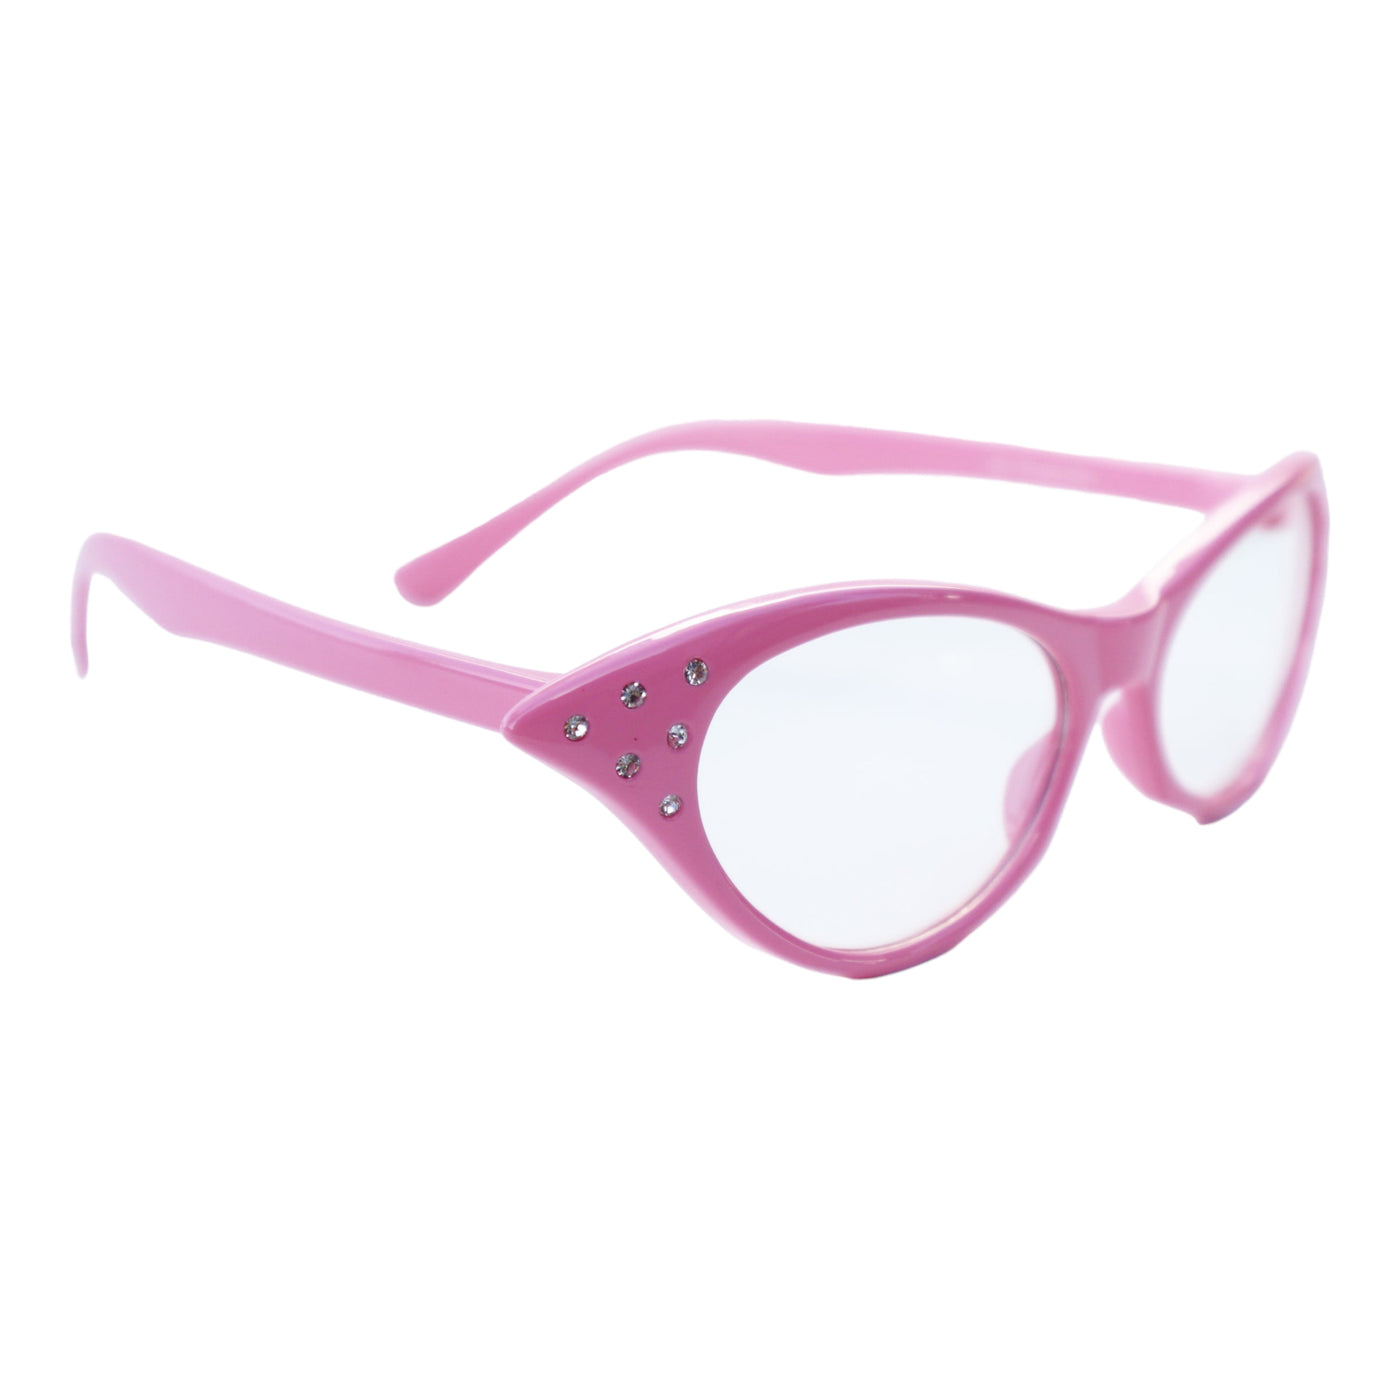 Miss Monroe Pink Frame Clear Cat-Eye Glasses with Rhinestones on the Side